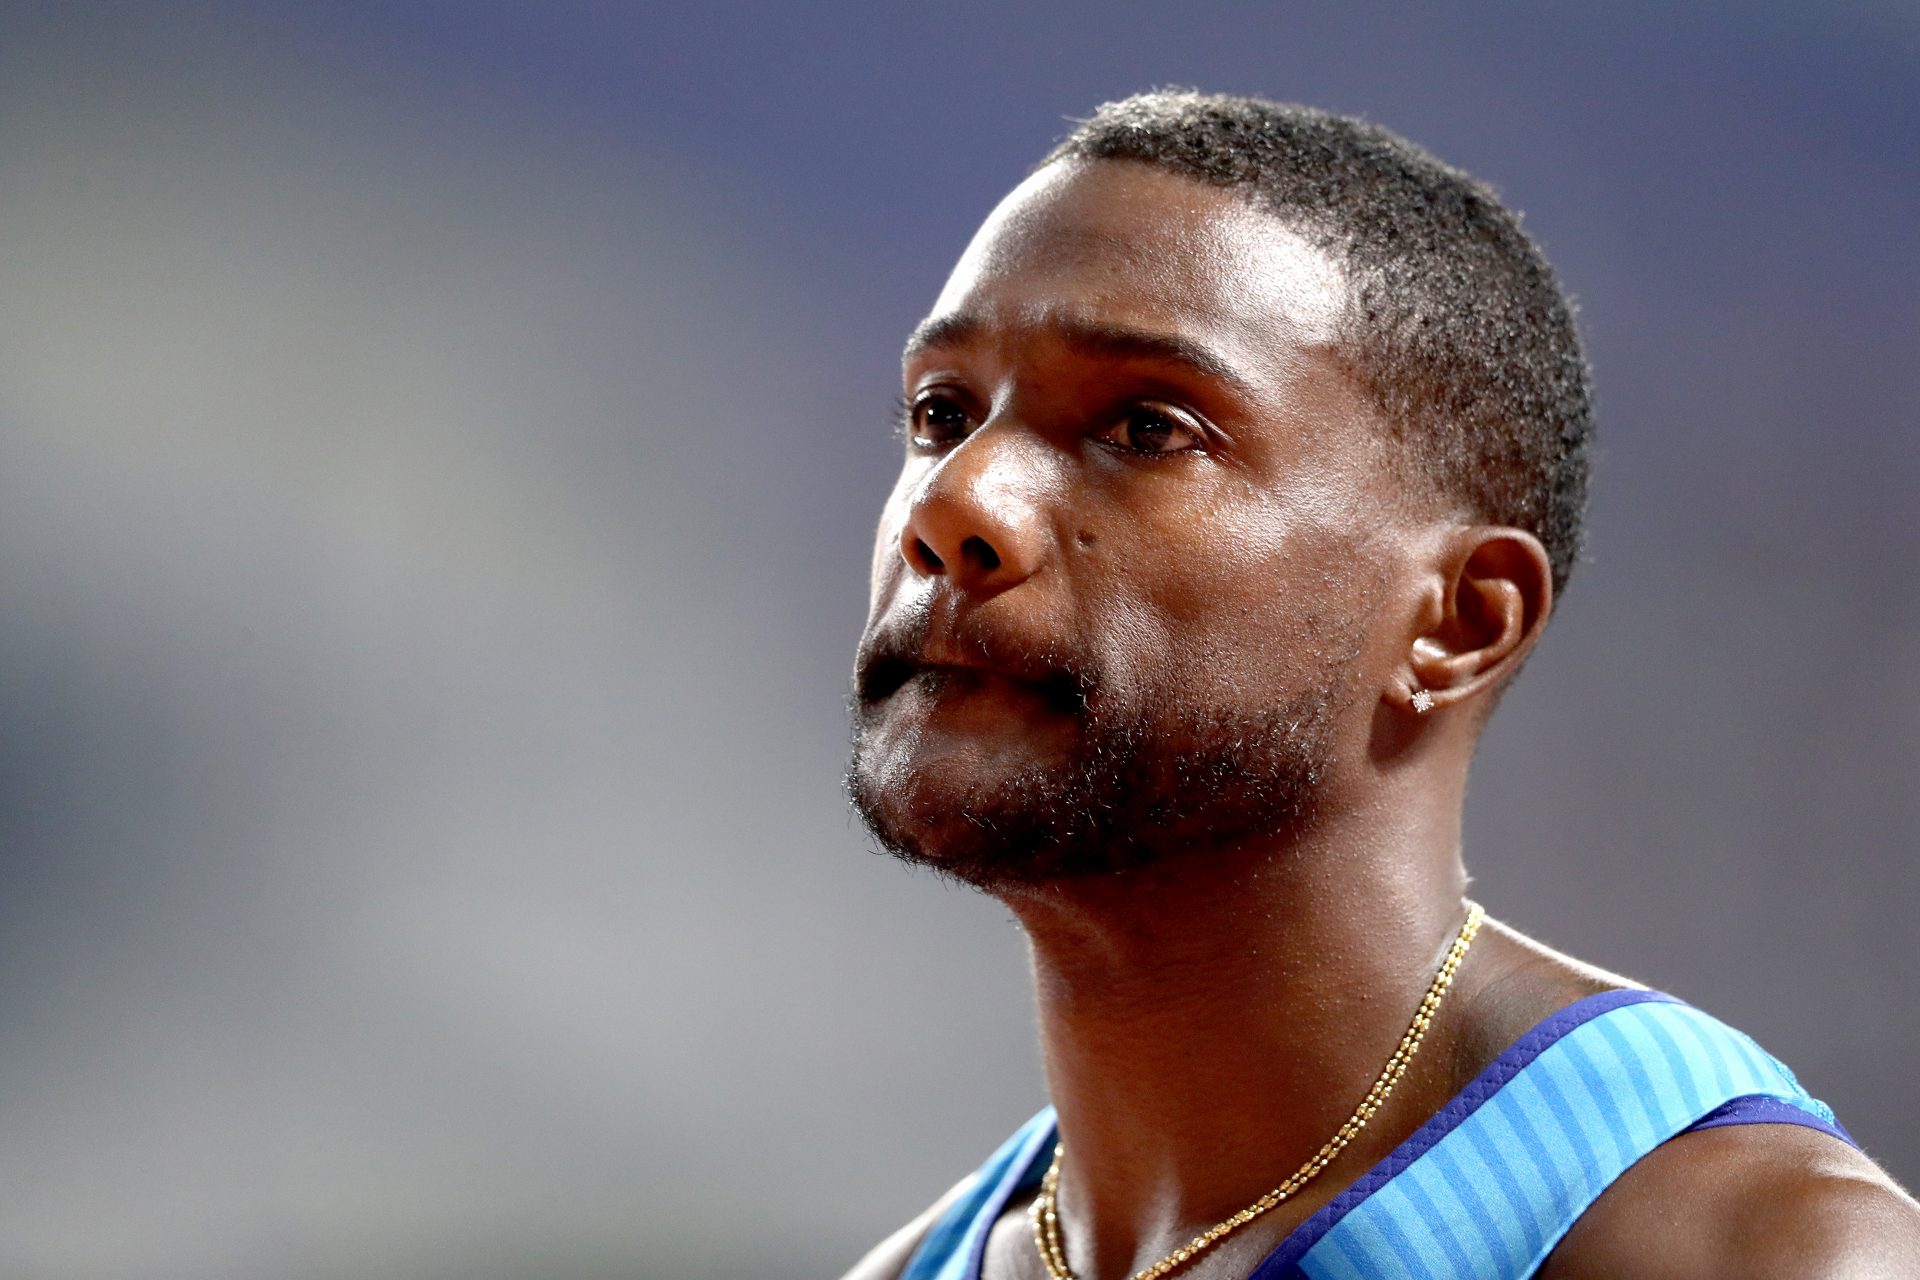 Justin Gatlin, the most controversial sprinter of all time?